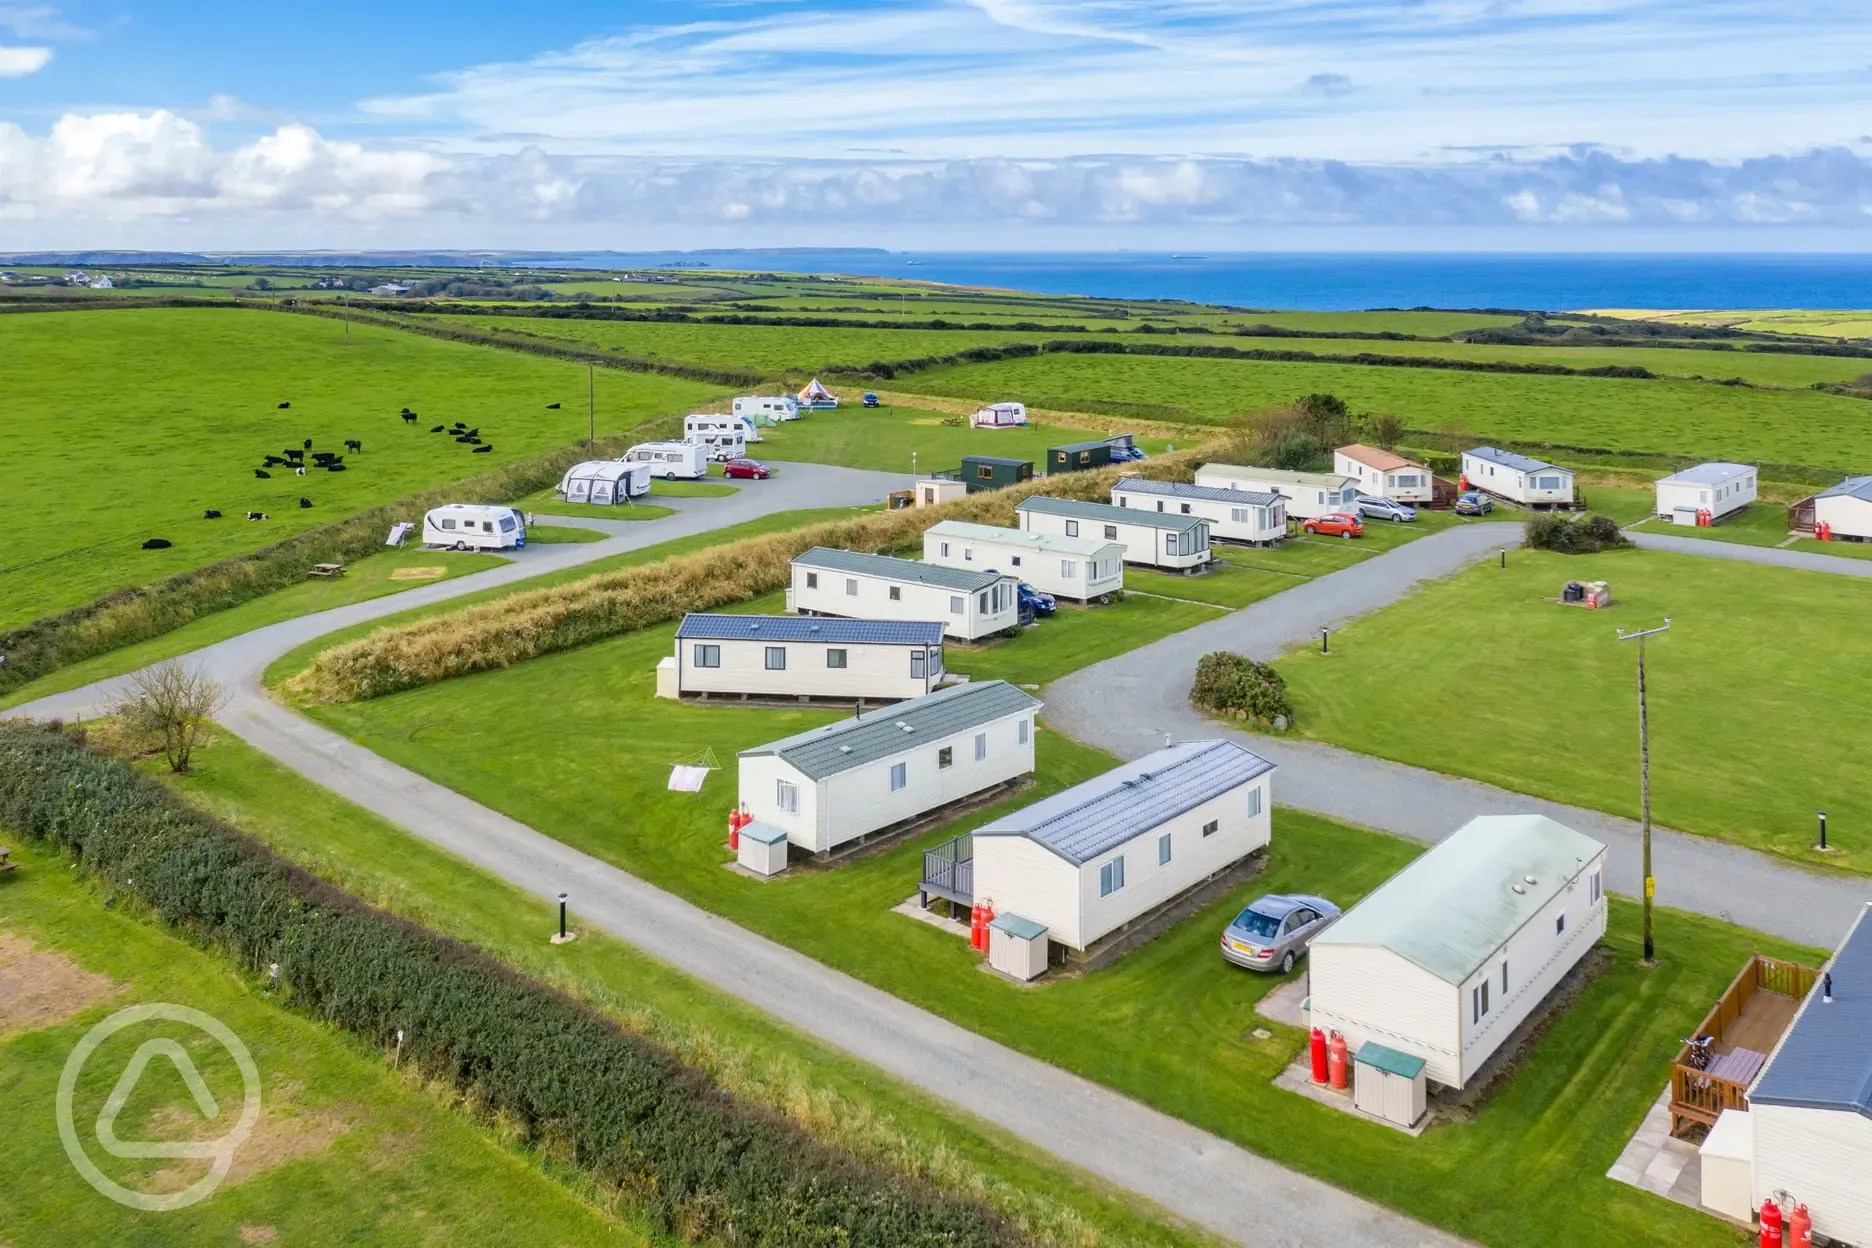 Aerial of the static caravans and hardstanding pitches by the sea